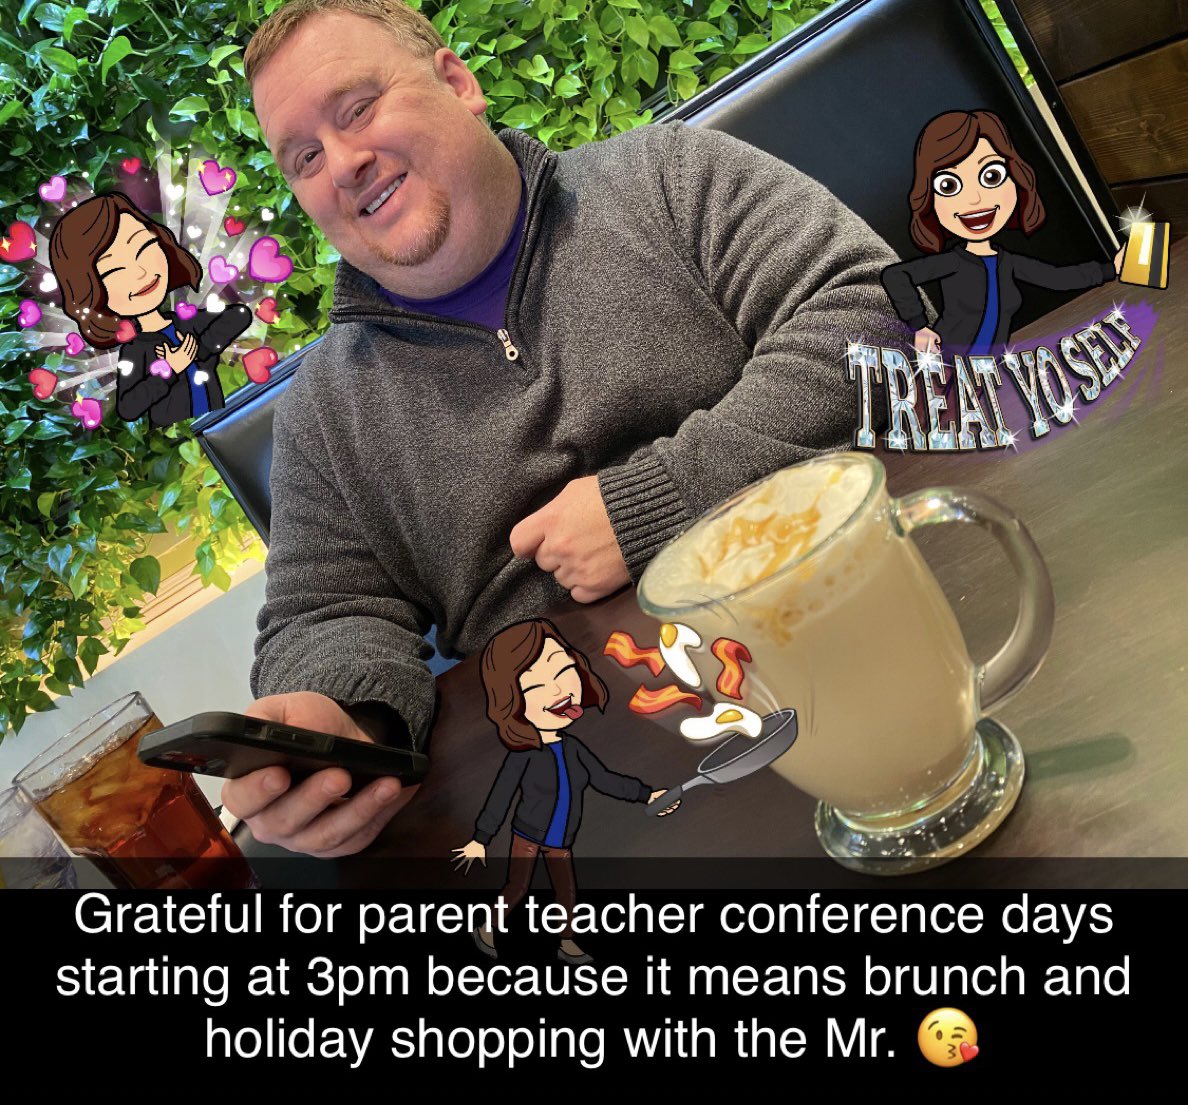 It’s been awhile since I have done #GratitudeSnaps and I had forgotten how wonderfully uplifting it is to focus on those things you are most grateful for! #LeadLAP #iledchat #principalsinaction #Pitzer3c